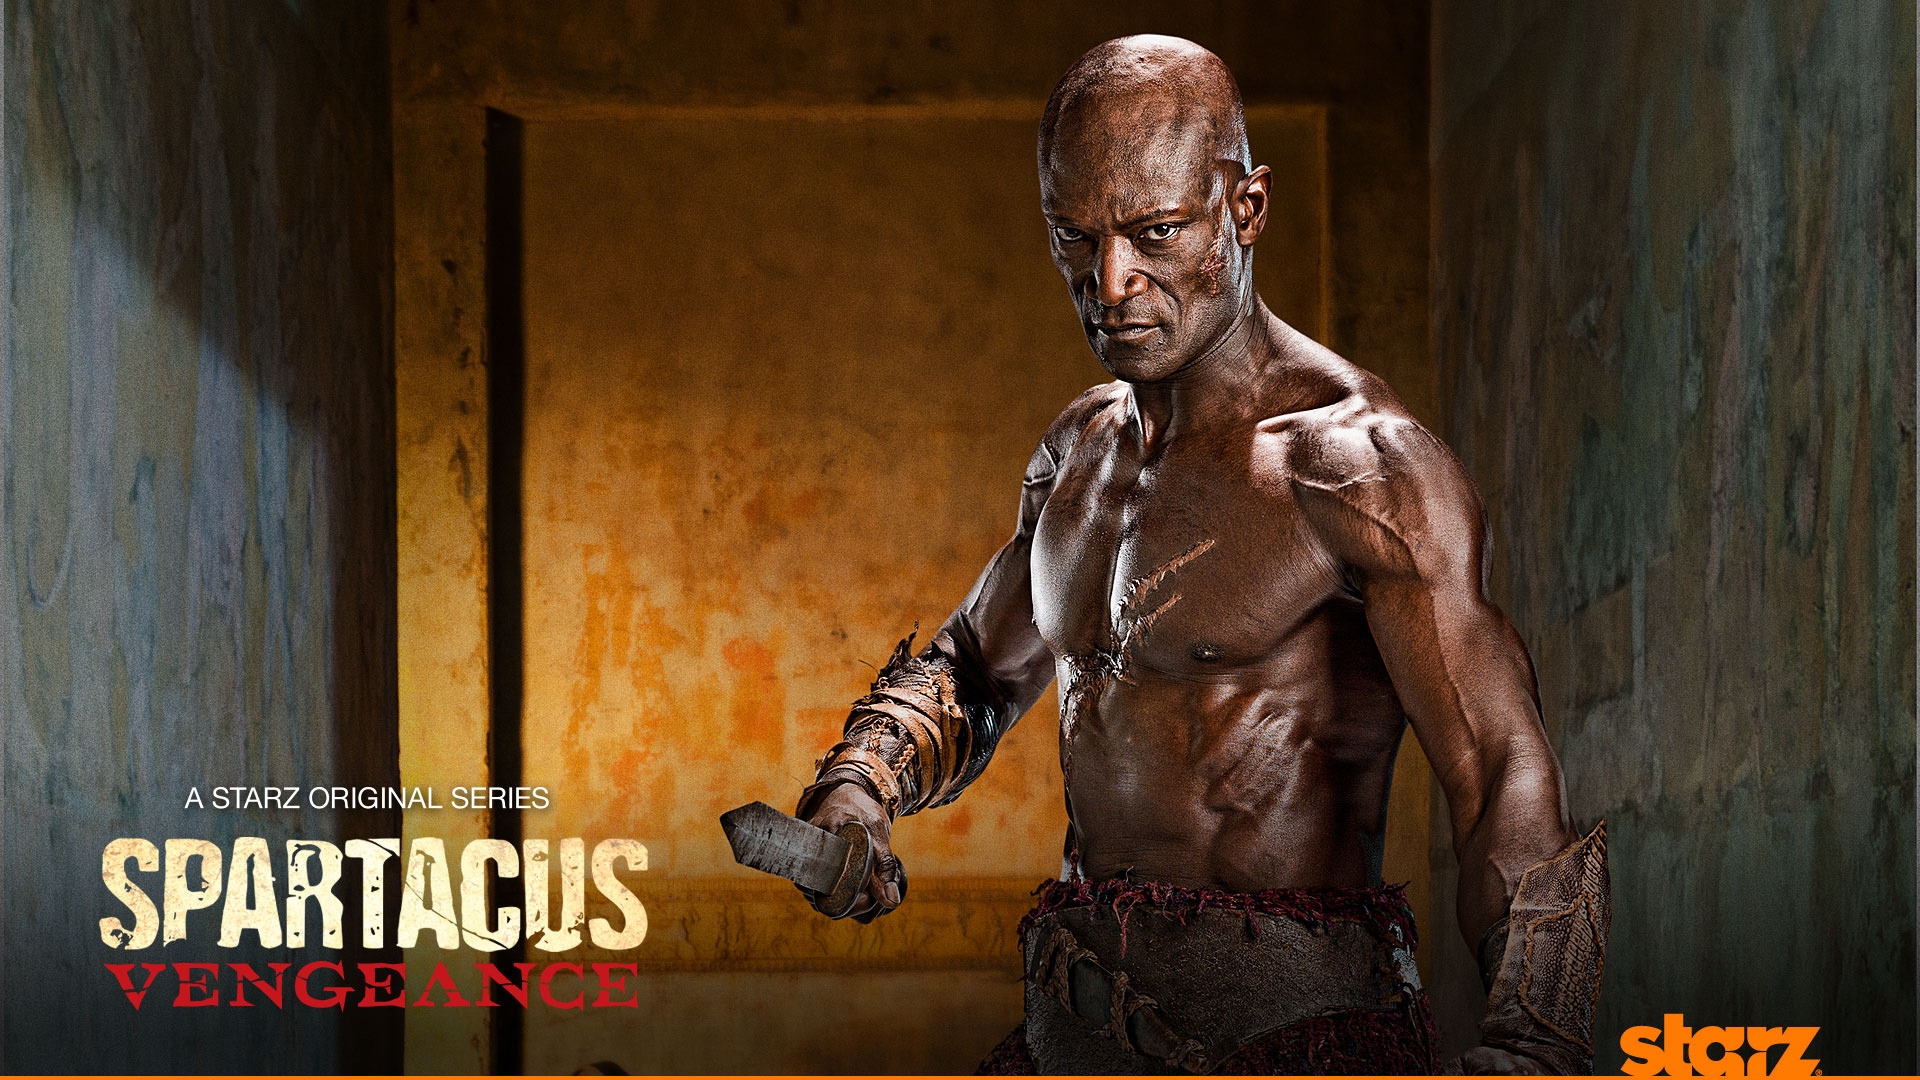 Doctore Spartacus Vengeance for 1920 x 1080 HDTV 1080p resolution